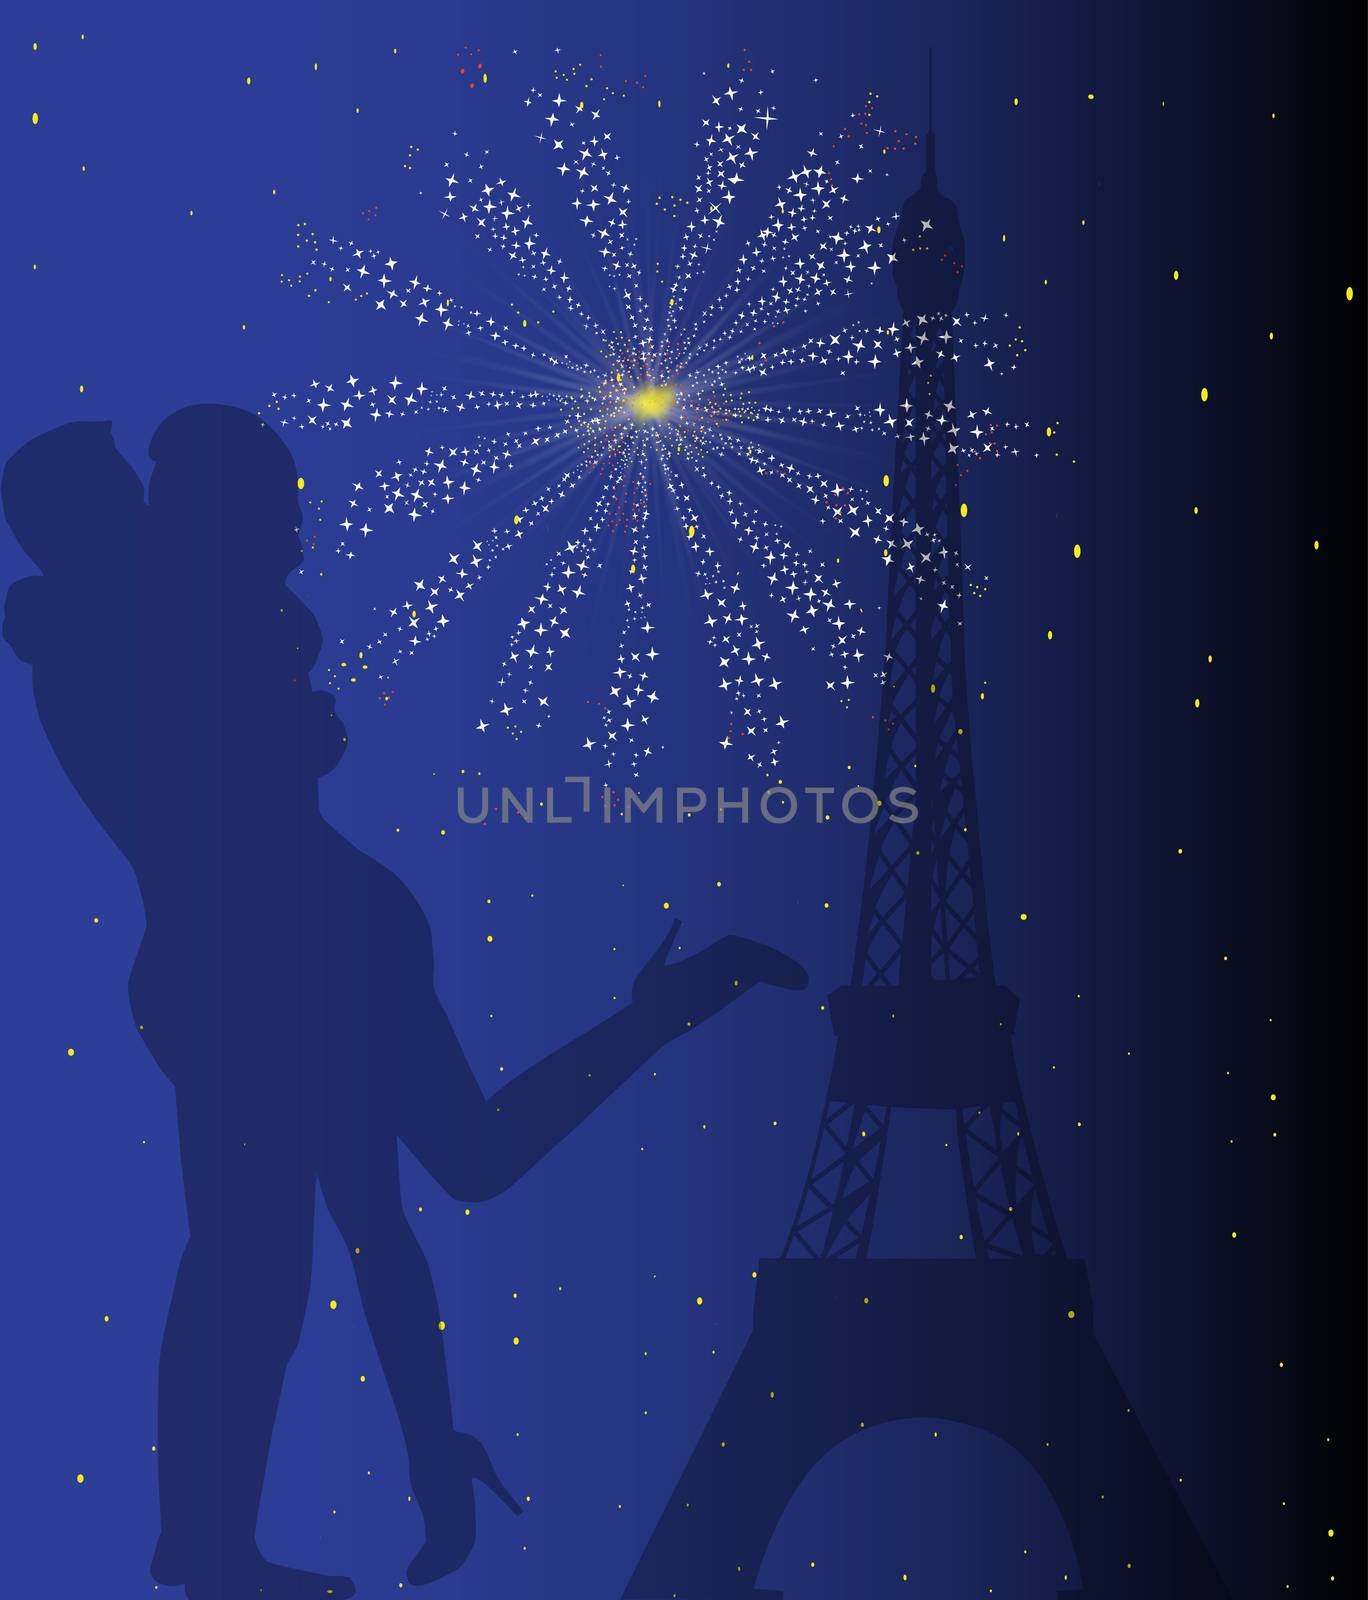 Paris at night with the Eiffel Tower and a couple kissing with firework explosion